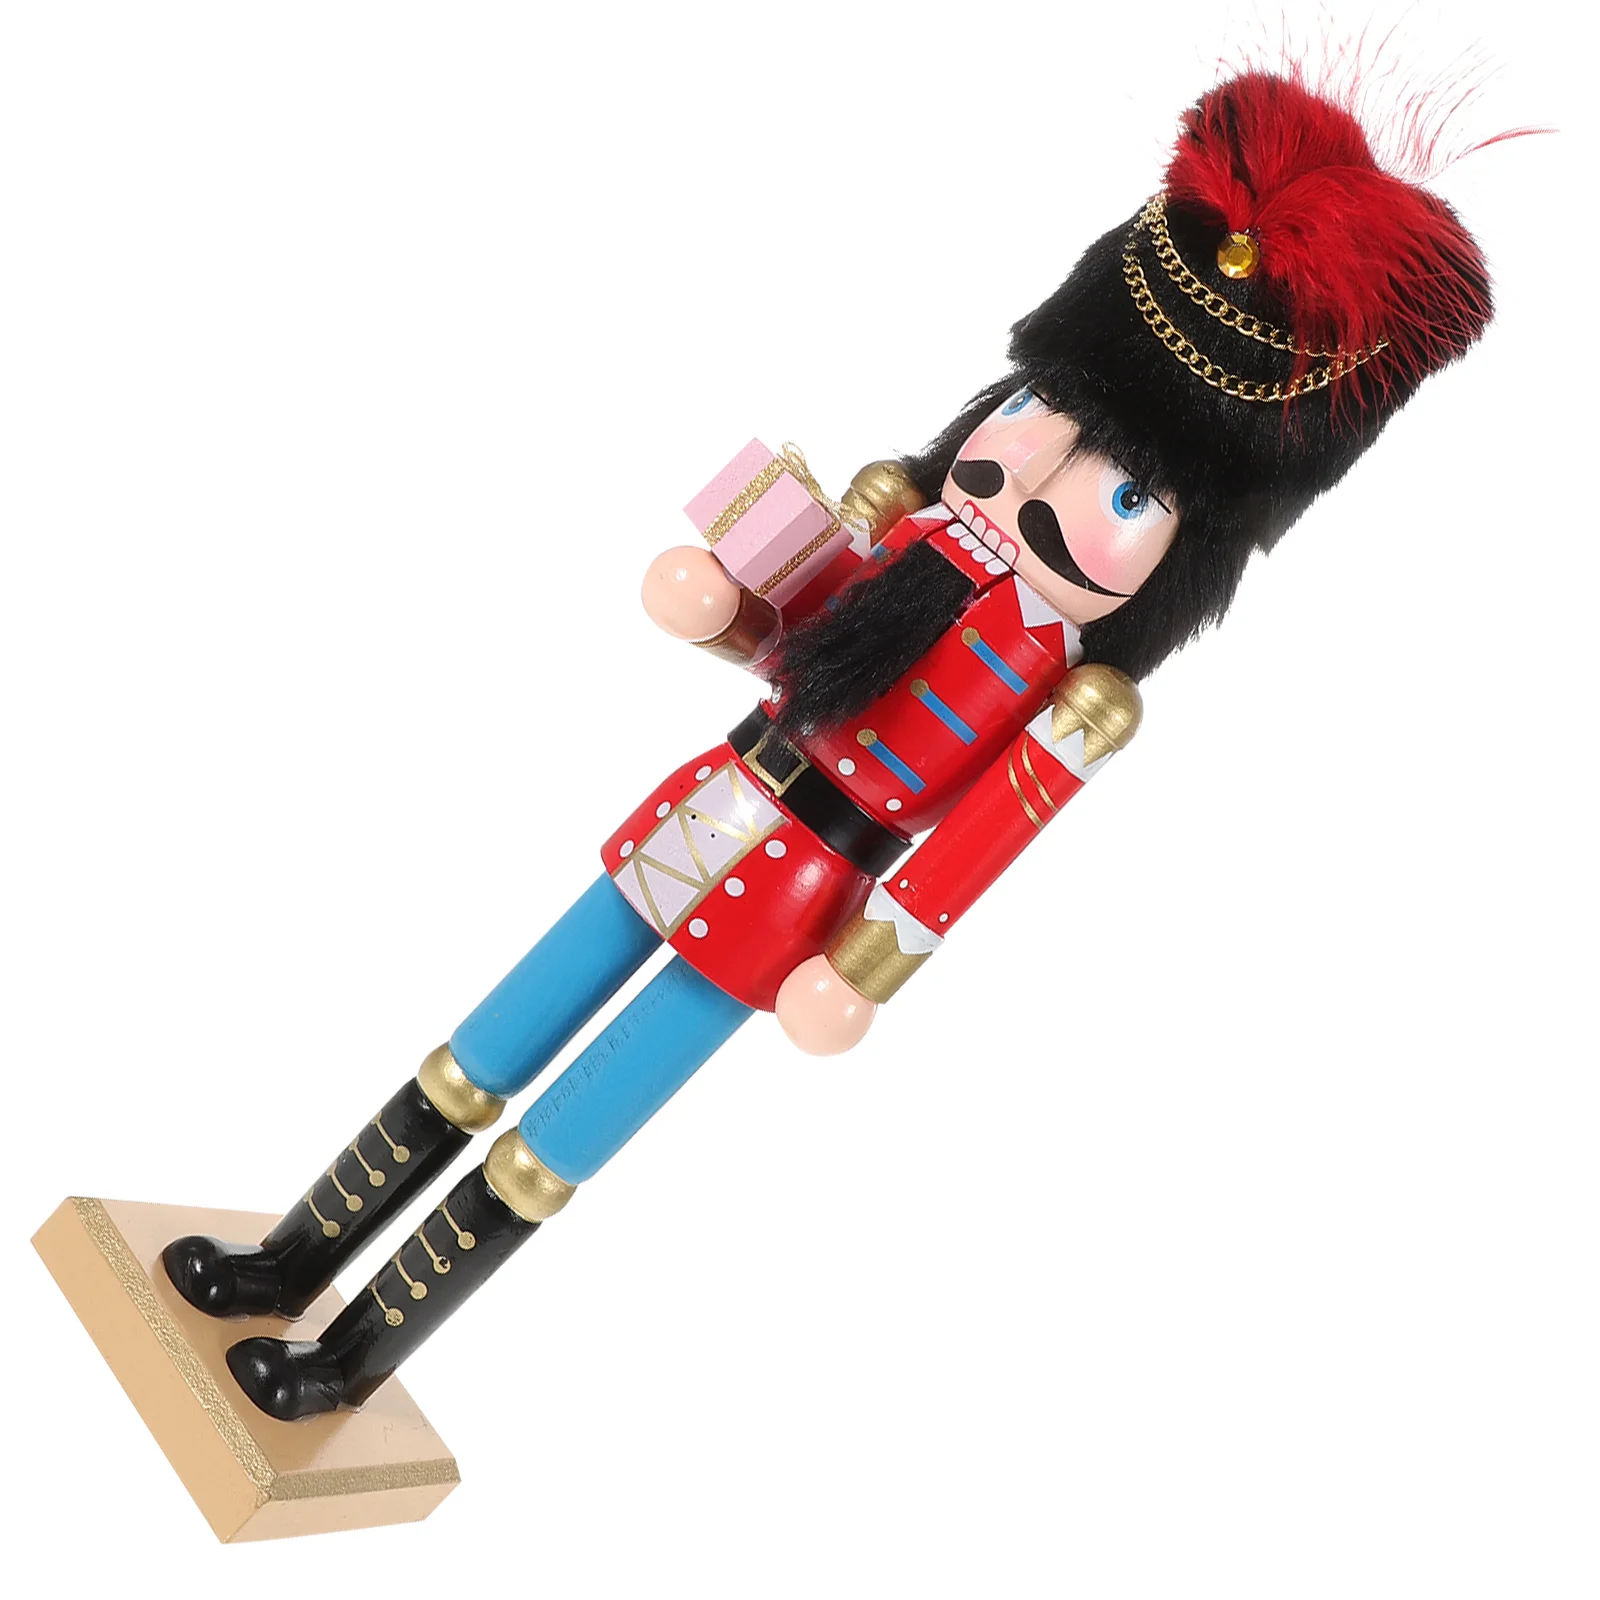 

Nutcracker Soldier Statue Nutcrackers Toy Wood Puppet Holiday Figure Puppets Decor Tabletop Figurine Garden King Ornament Action